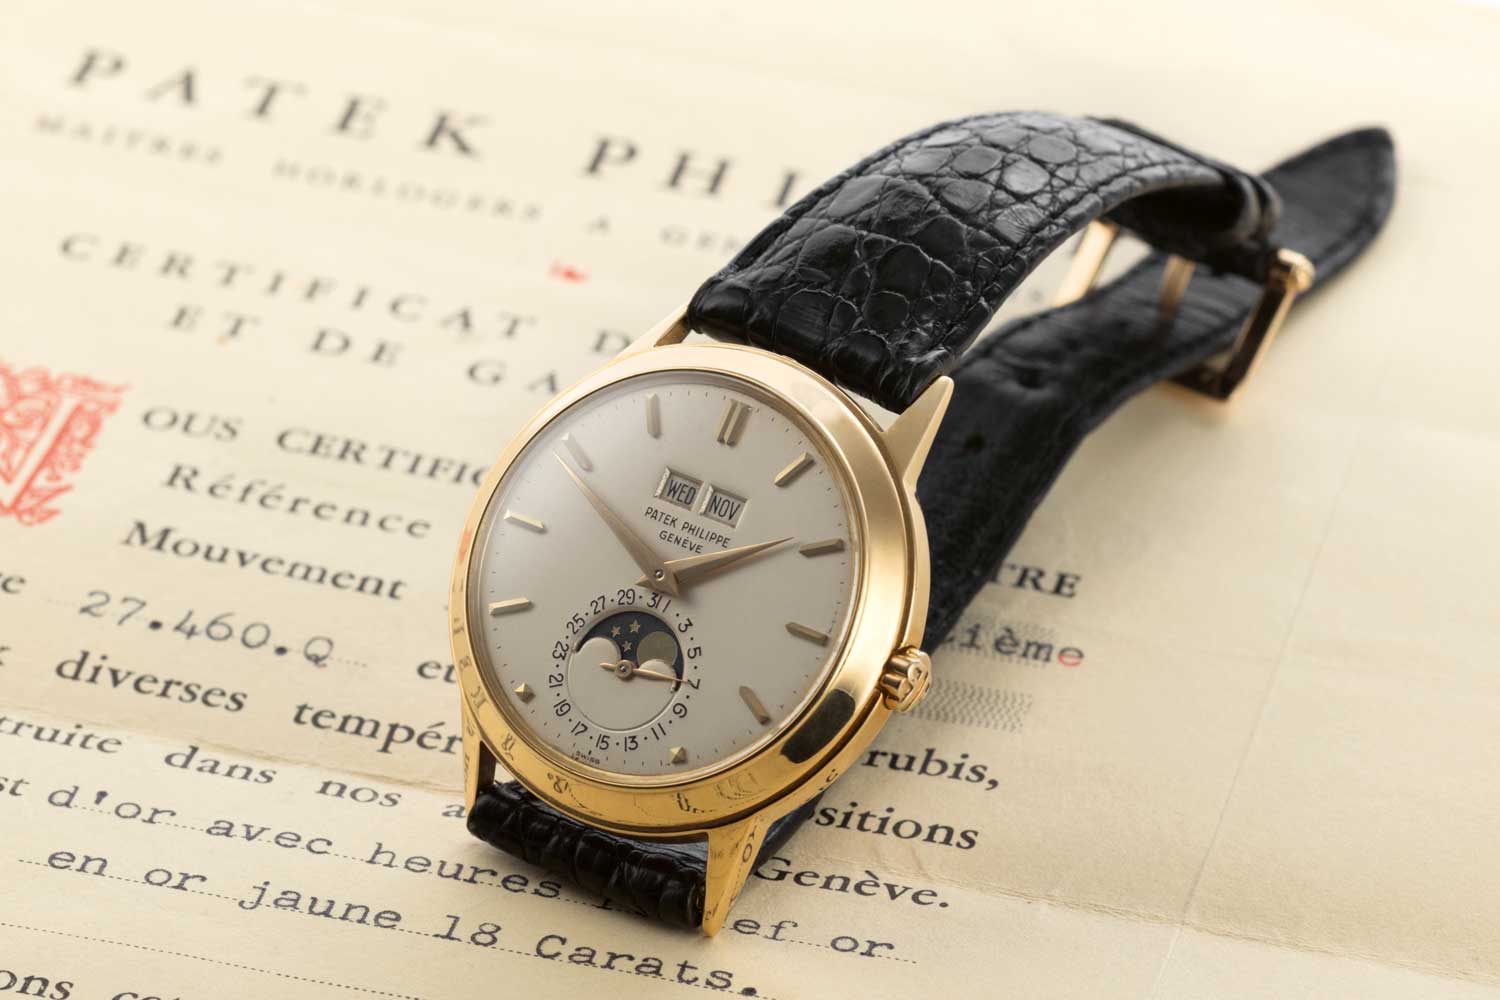 Another first for Patek came in 1962 in the form of Ref. 3448, a self- winding perpetual calendar